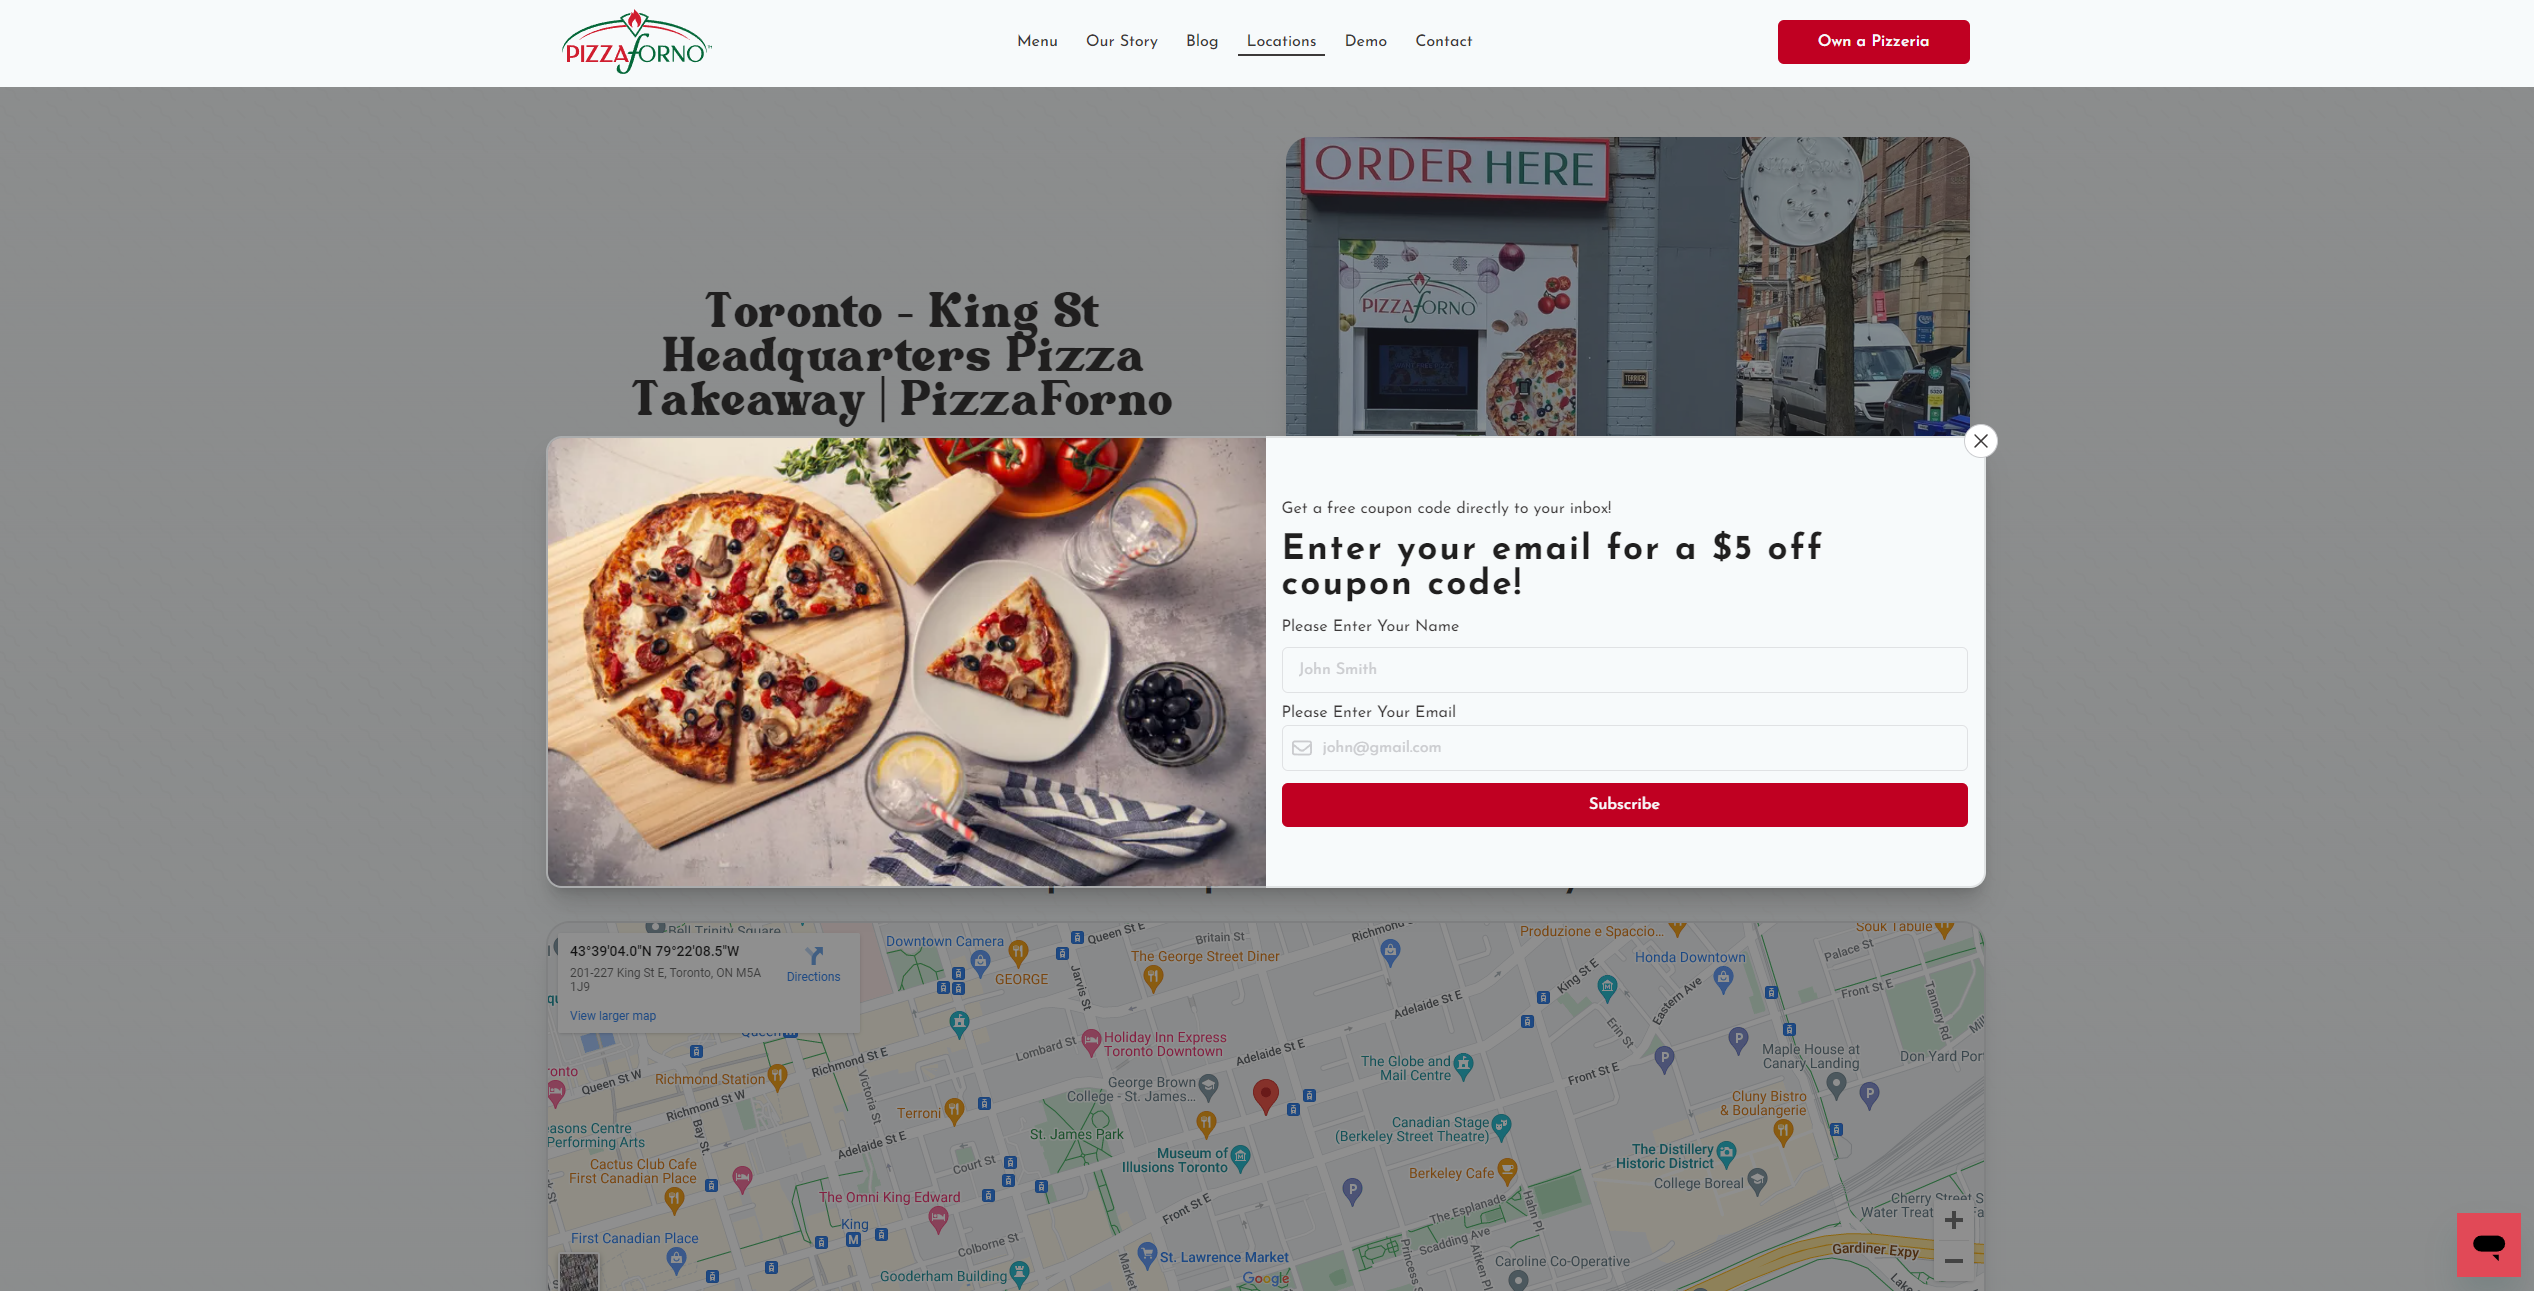 An image of the PizzaForno about us page